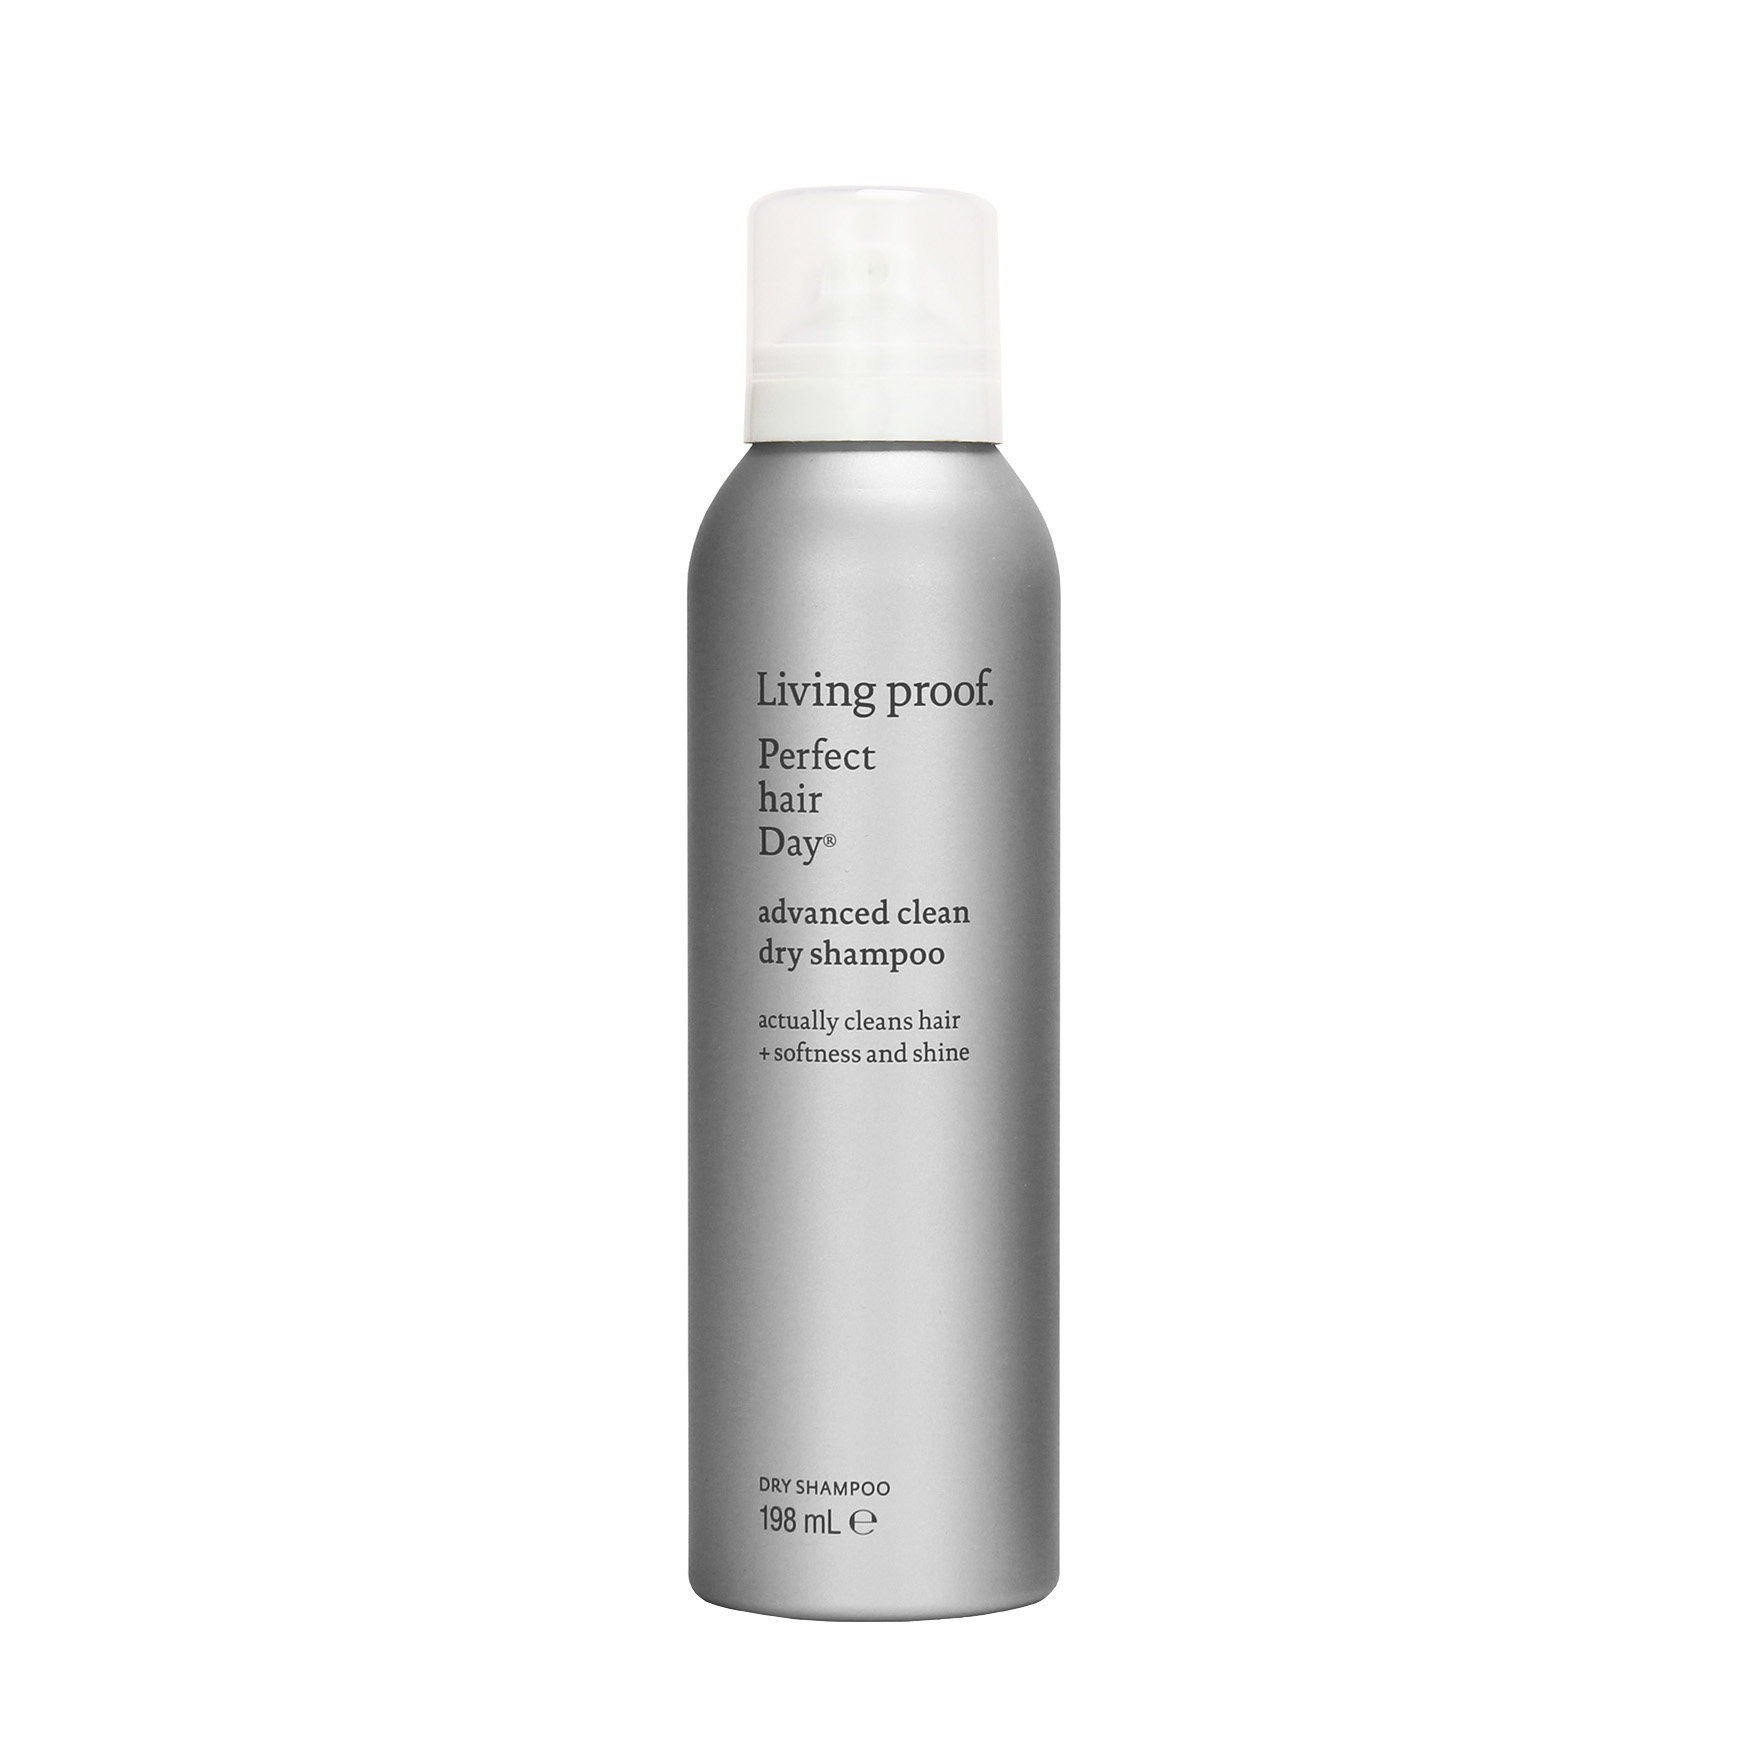 Living Proof Perfect hair Day™ (PhD) Advanced Clean Dry Shampoo | Space NK